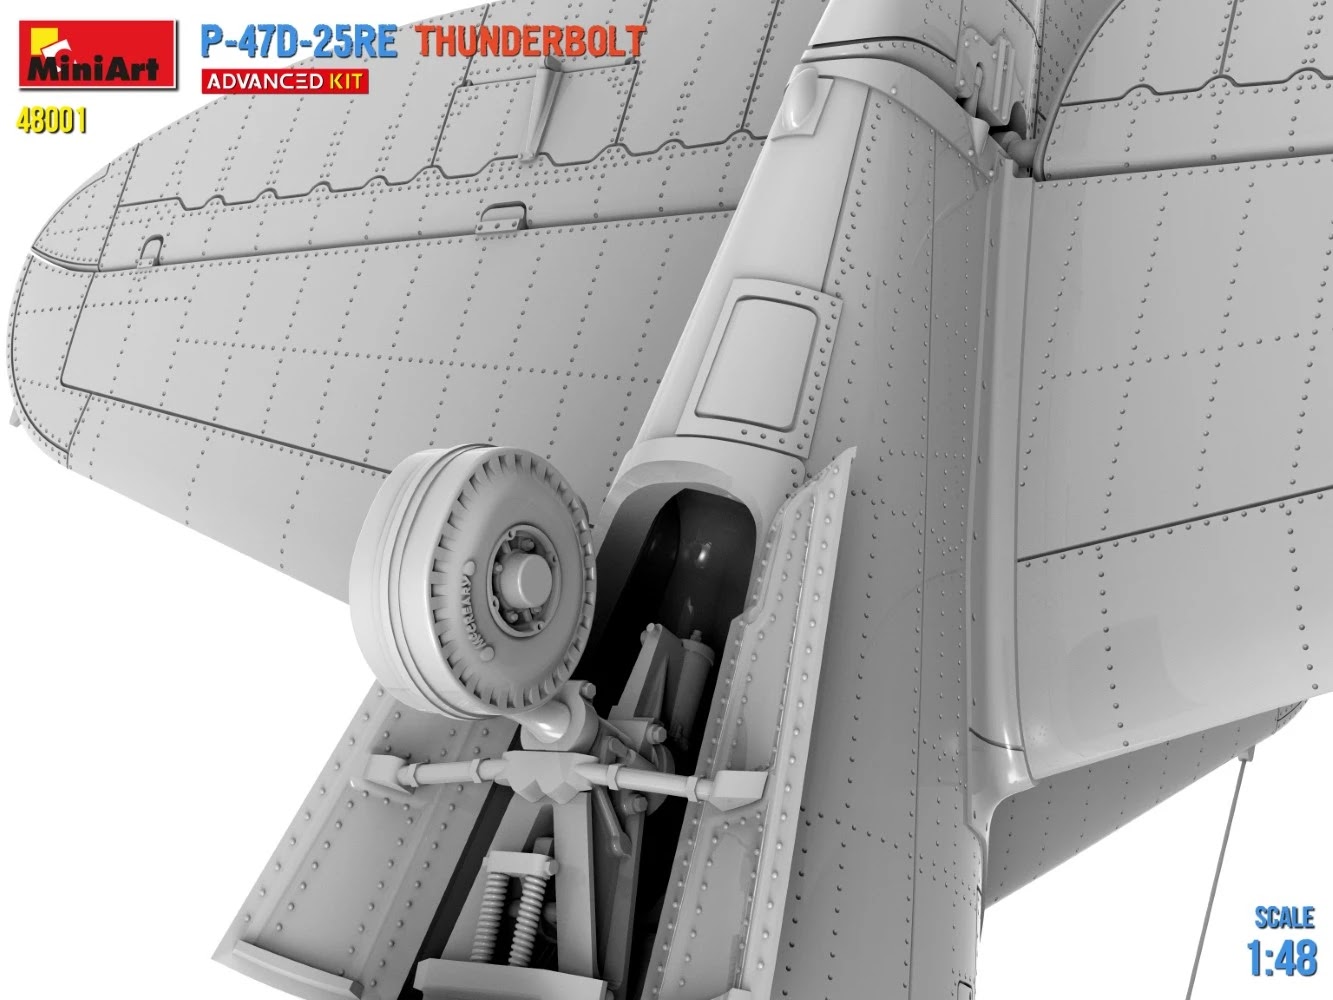 MiniArt ups the detail on their P-47D CAD Tailwheel Detail